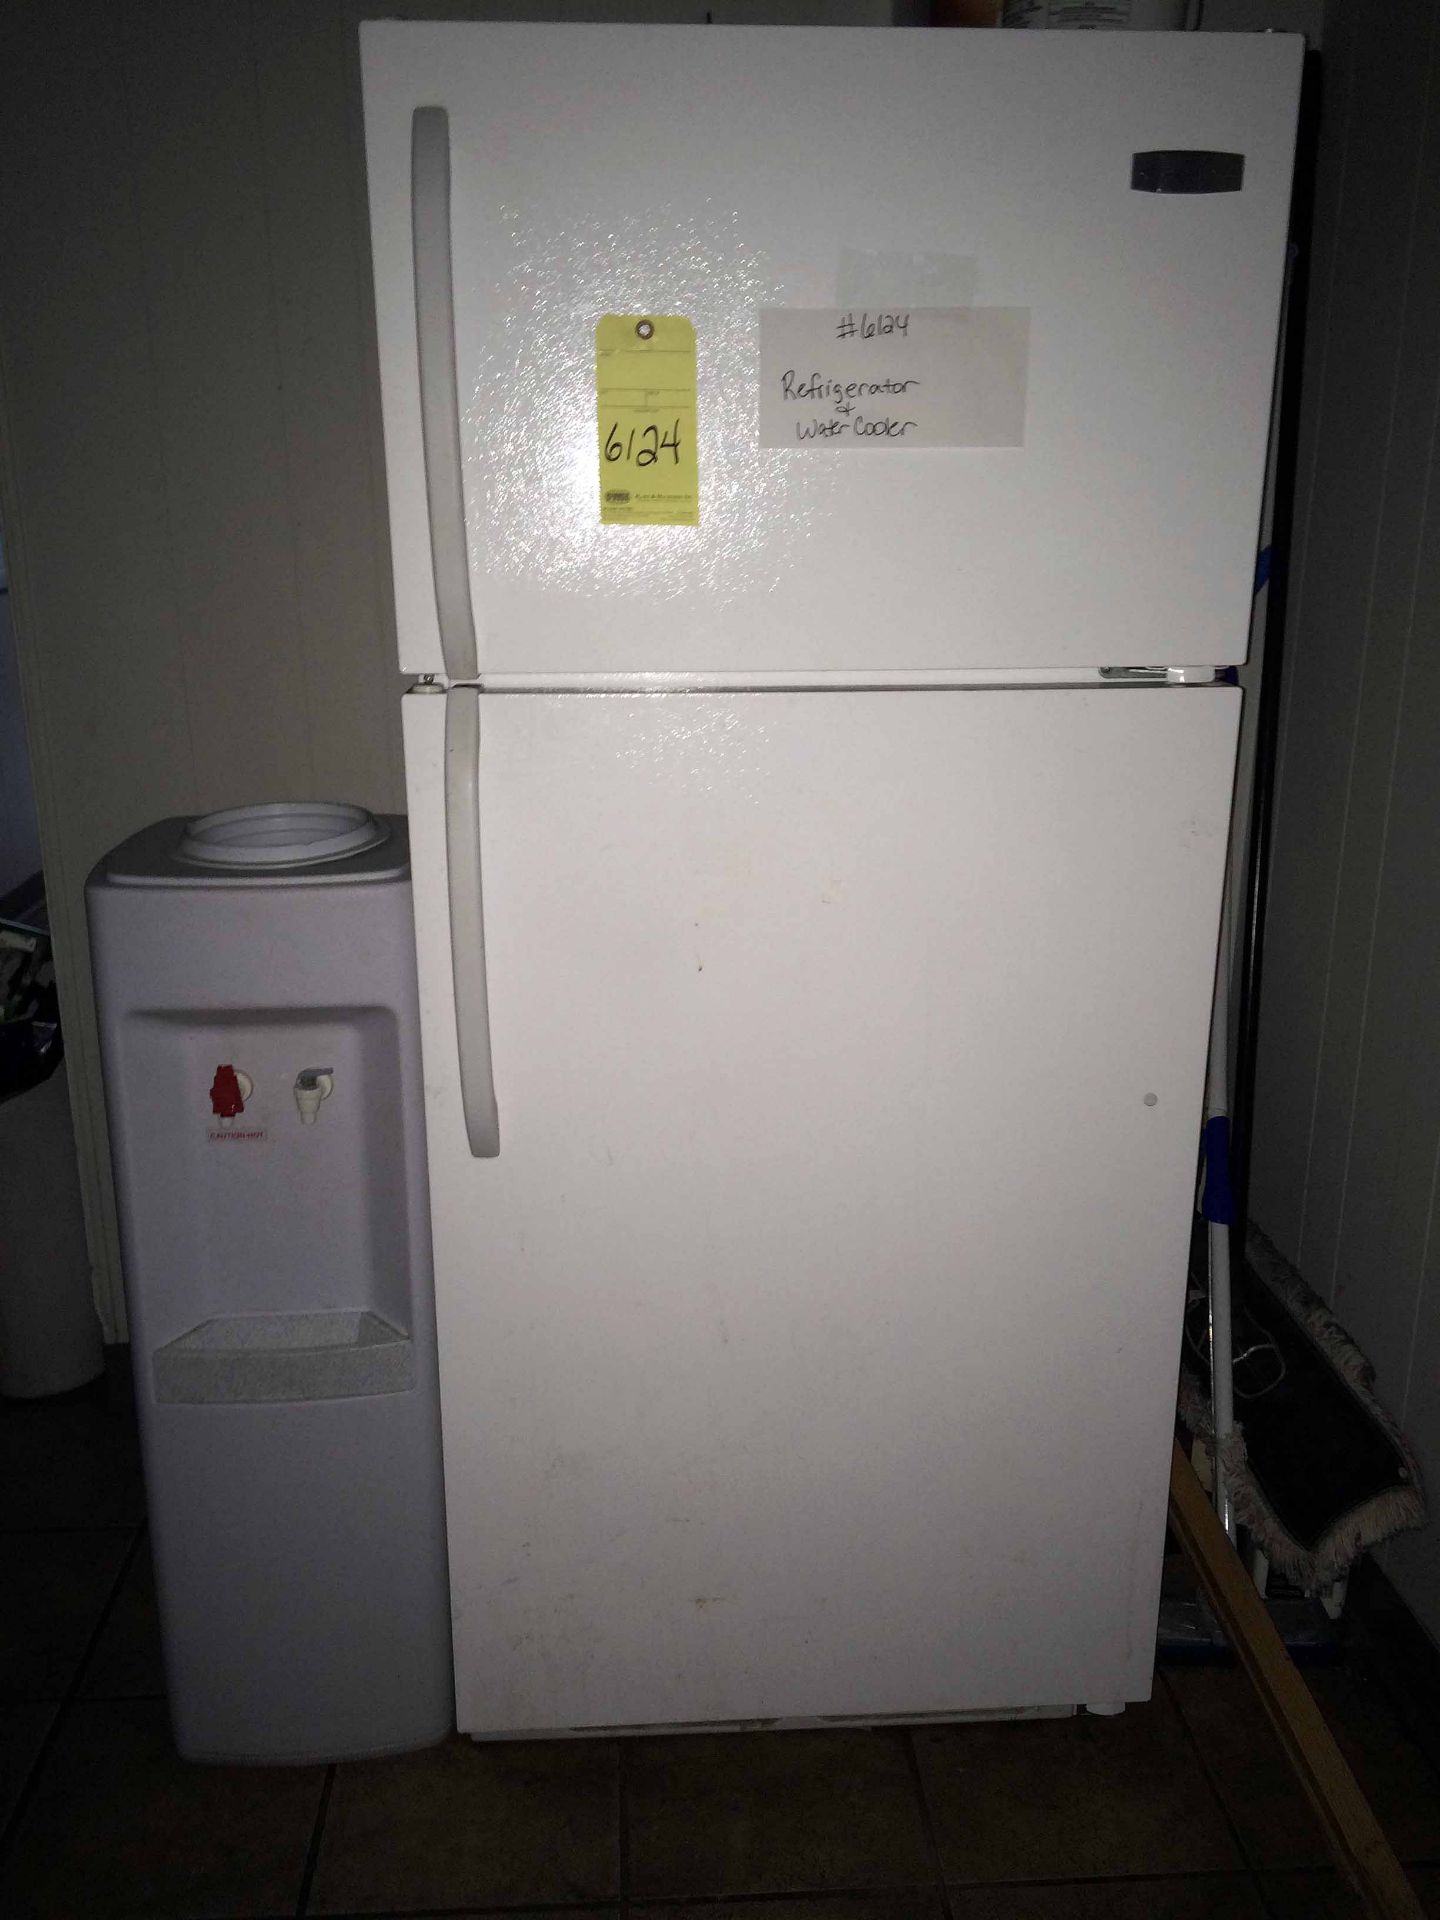 LOT CONSISTING OF REFRIGERATOR & WATER COOLER LOCATED IN LONGVIEW, TX